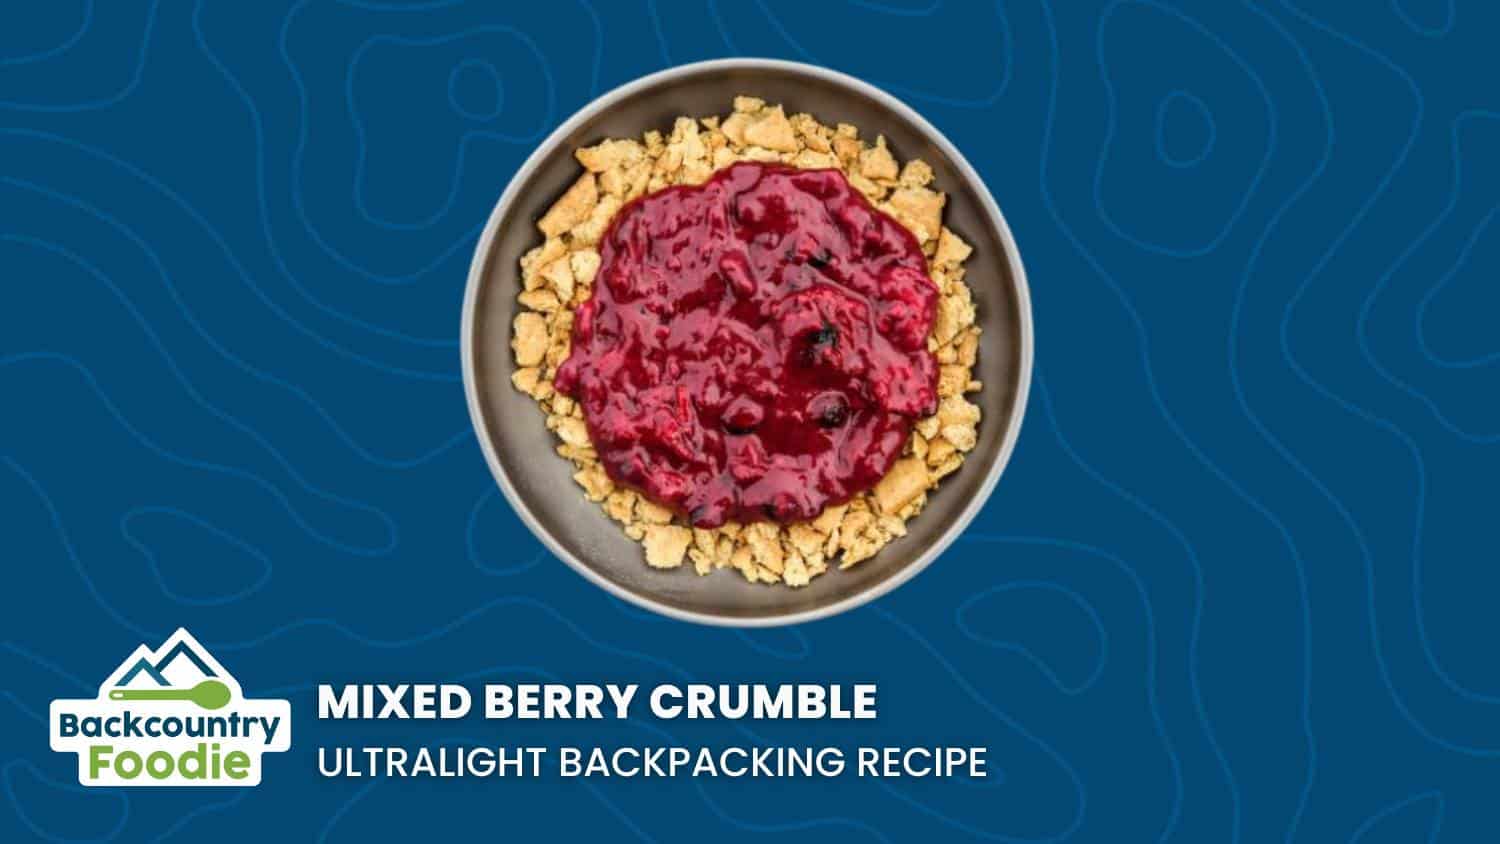 Backcountry Foodie Mixed Berry Crumble DIY Ultralight Backpacking Recipe thumbnail image